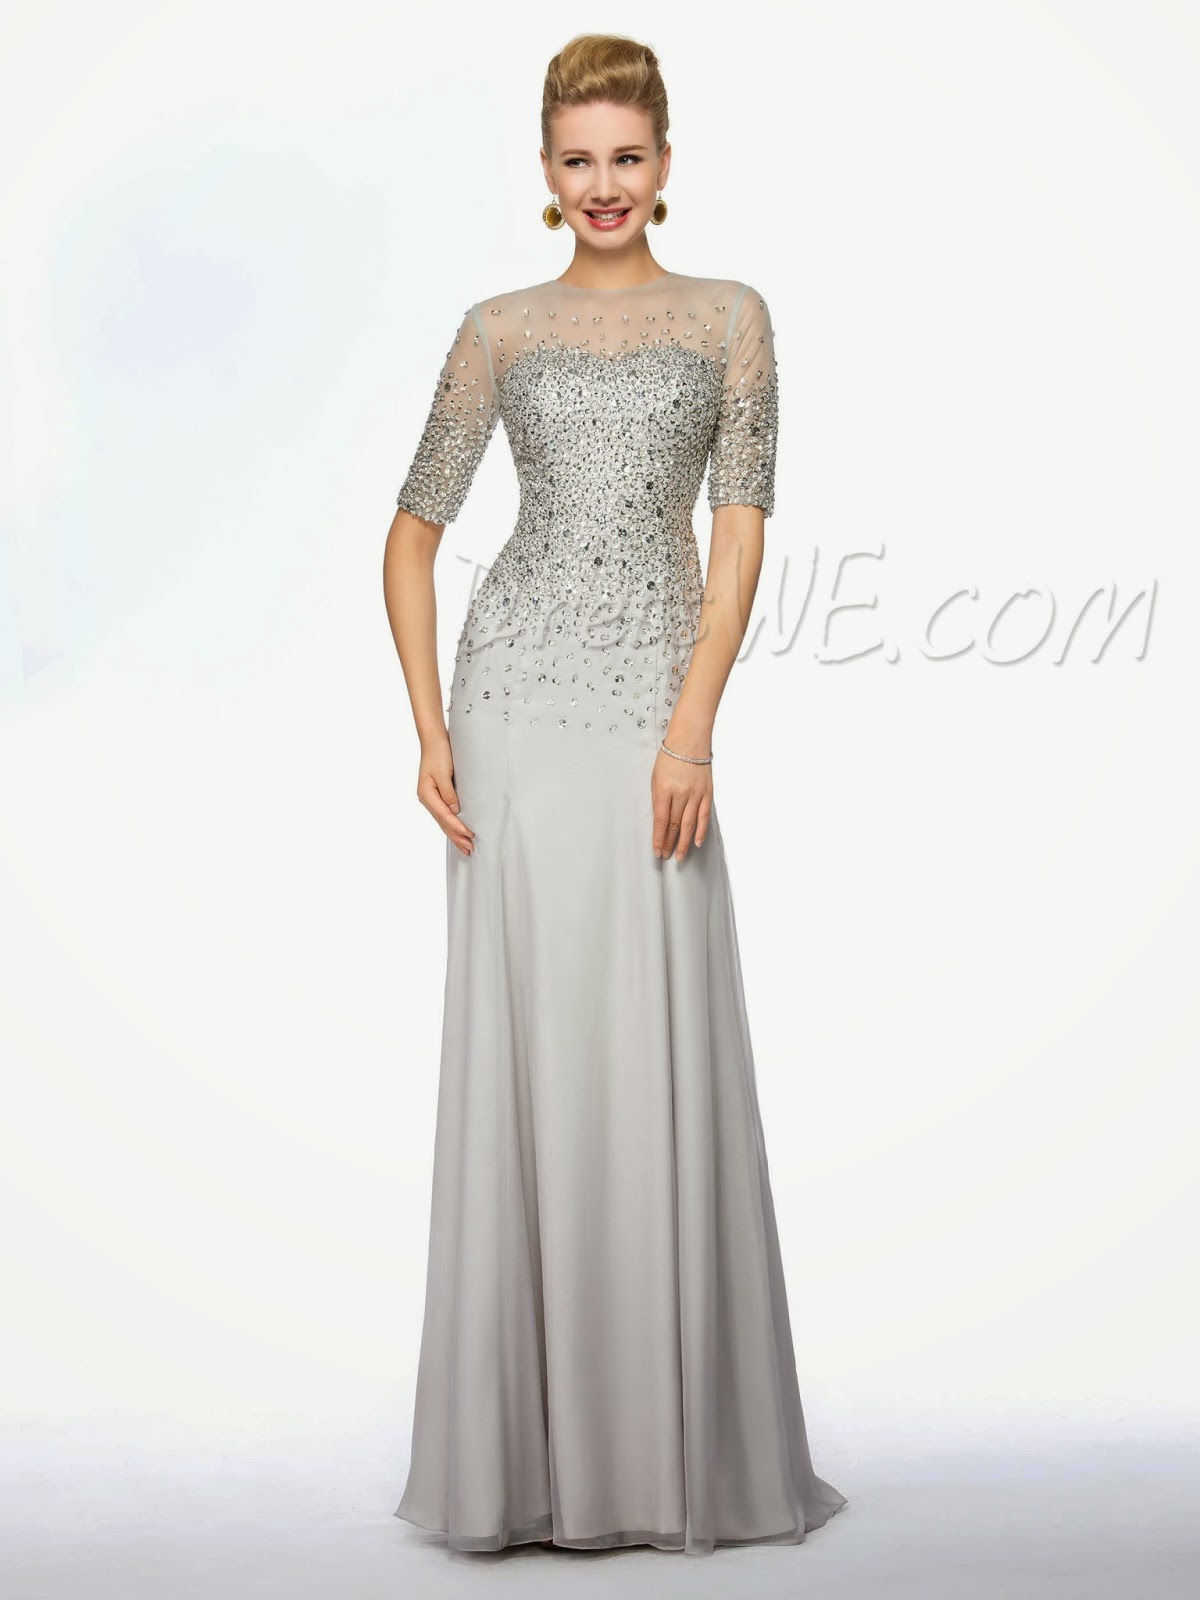 mother of bride dresses, mother of bride shoes, bridal dresses, bridesmaid dresses, celebrity dresses, cheap wedding dresses, Cocktail dresses, dresses, evening dresses, LBD, mermaid dresses, prom dresses, wedding dresses online, dresswe, dresswe review,Cocktail dresses, dresses, evening dresses, pink dress, mermaid dresses, fashion, prom dresses, long evening dress with slit, boat neck dress, dresswe, dresswe review,beauty , fashion,beauty and fashion,beauty blog, fashion blog , indian beauty blog,indian fashion blog, beauty and fashion blog, indian beauty and fashion blog, indian bloggers, indian beauty bloggers, indian fashion bloggers,indian bloggers online, top 10 indian bloggers, top indian bloggers,top 10 fashion bloggers, indian bloggers on blogspot,home remedies, how to